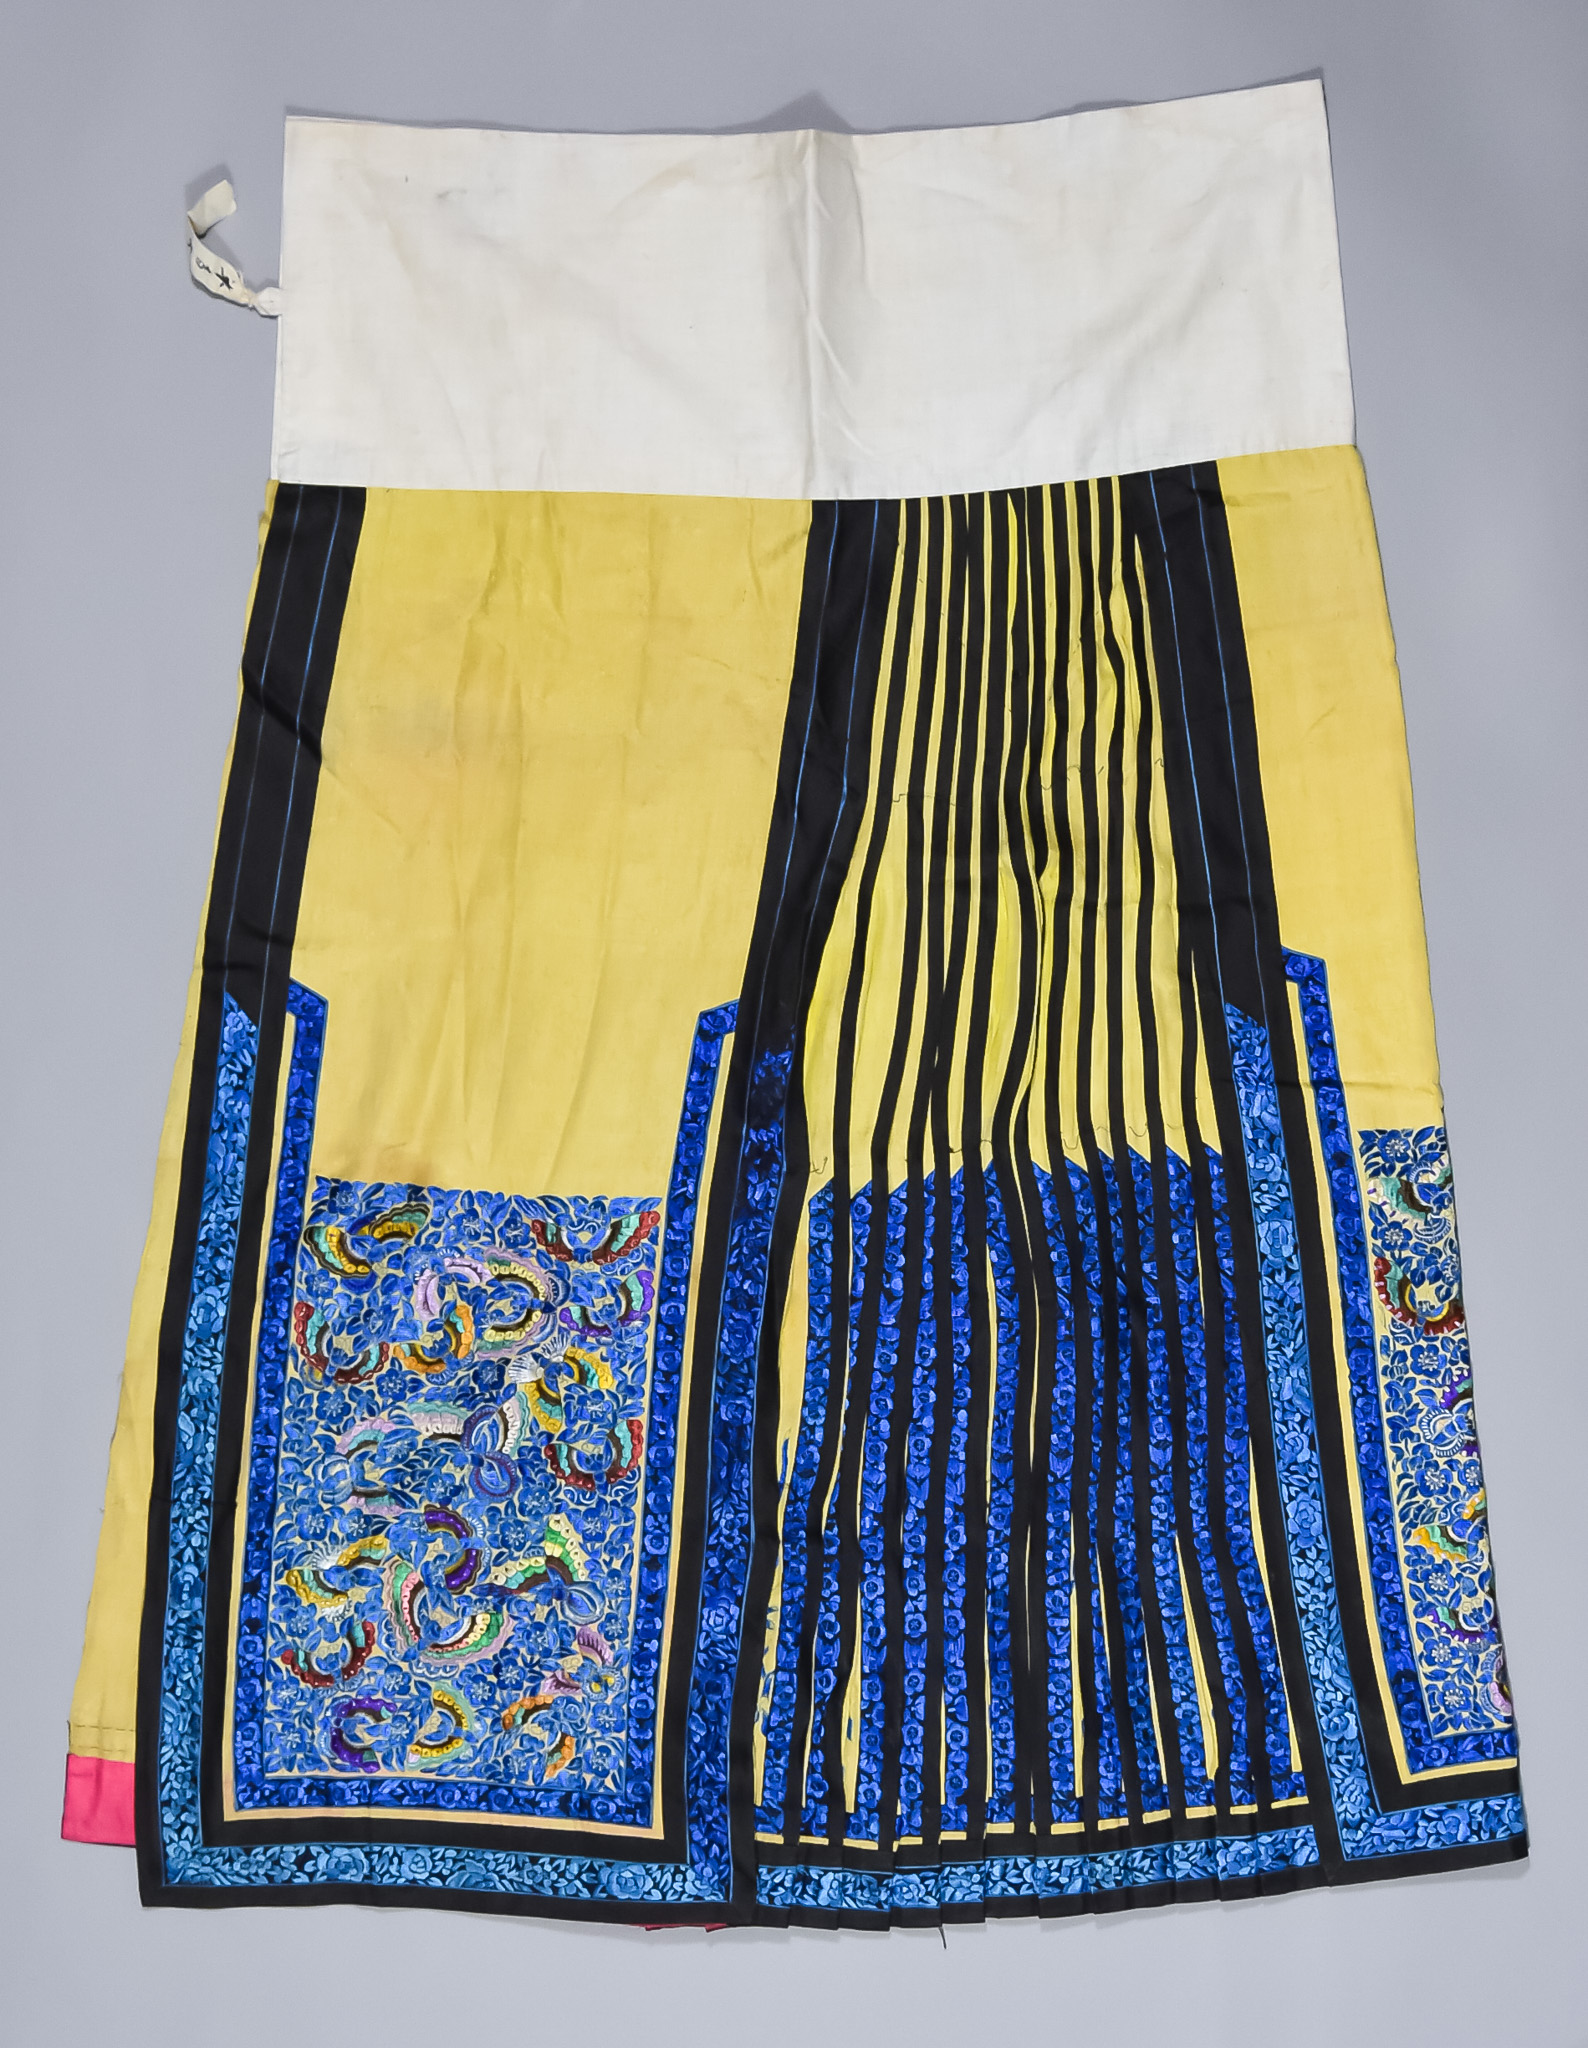 Two Chinese Silk Embroidered Skirts, Late 19th/Early 20th Century, one in soft yellow worked in